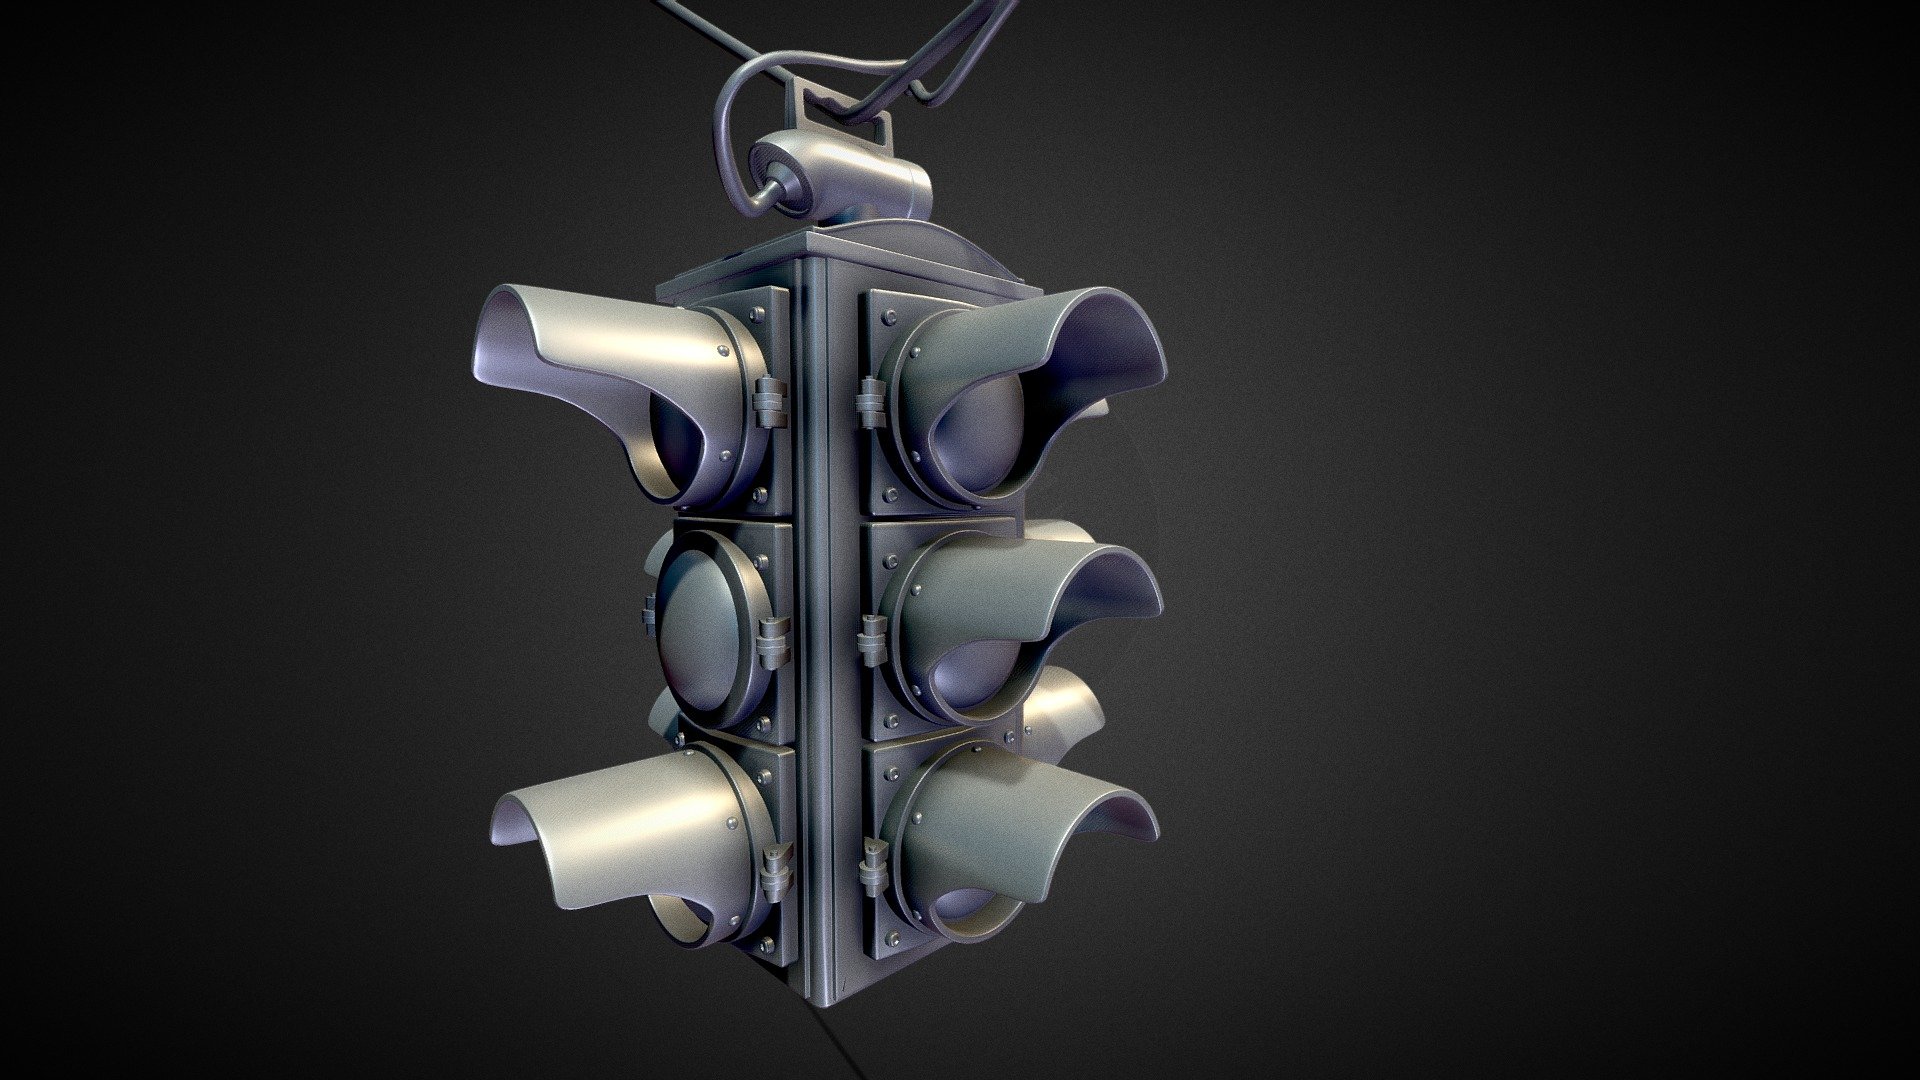 3D High-Poly Four-Way Hanging Traffic Signal Light! Excellent asset for 3D Environment Artist to extract high-poly details for textures maps and create game assets! Makes a great 3d model to enhance your 3D projects!

Features:
* Additional Maya File with sub-division ready models, for further editing for additional detail!
* Unique Traffic Signal Light for your 3D projects!

An excellent 3D asset for 3D game development or your personal project!
Purchase Today! - 3D Four-Way Traffic Light - High Poly - Buy Royalty Free 3D model by Boney Toes (@boneytoes) 3d model